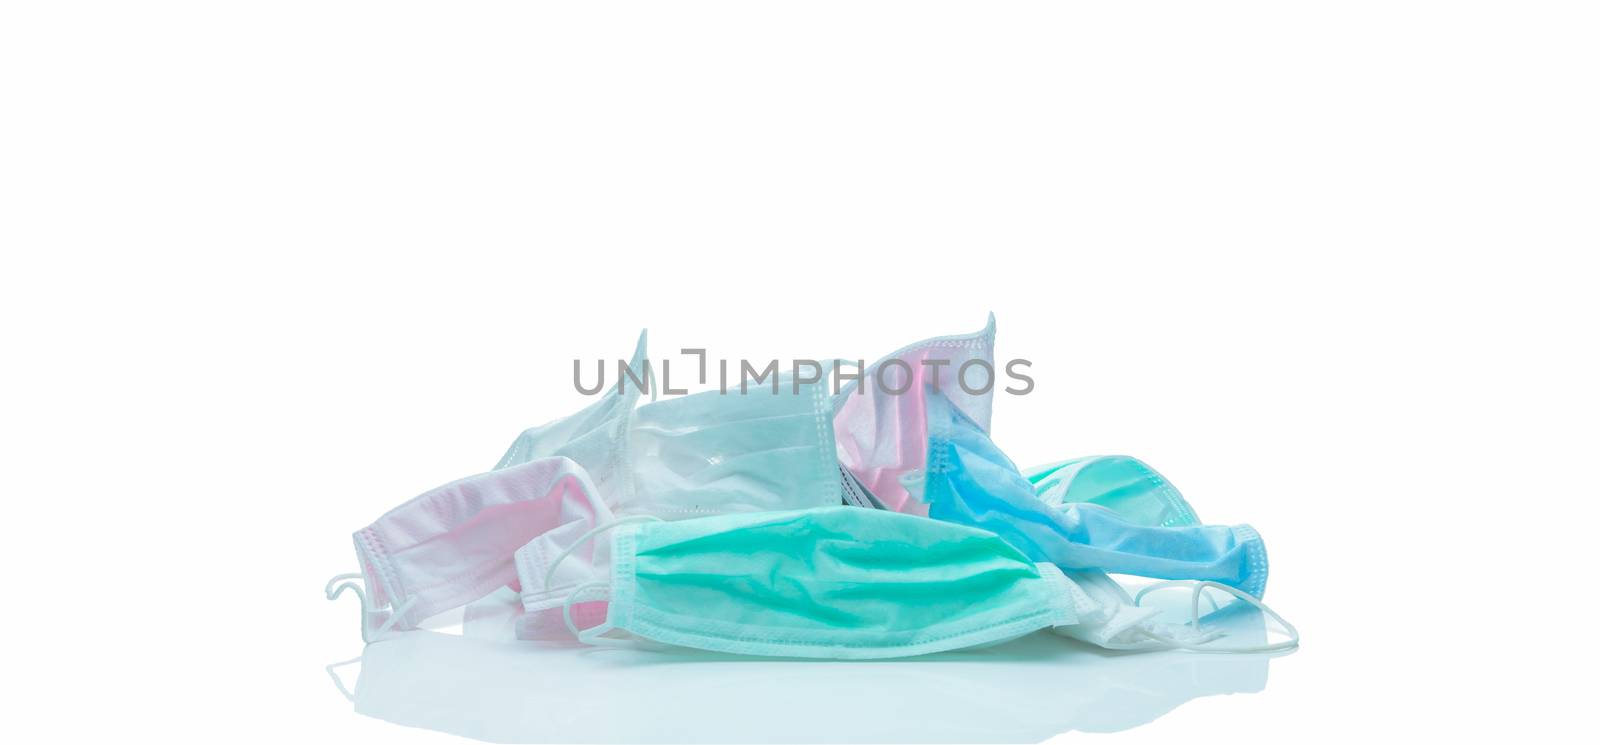 Pile of used surgical face mask isolated on white background. Medical waste. Infectious waste from coronavirus crisis. Pink, green, blue, and white medical face mask waiting for disposal with hygienic